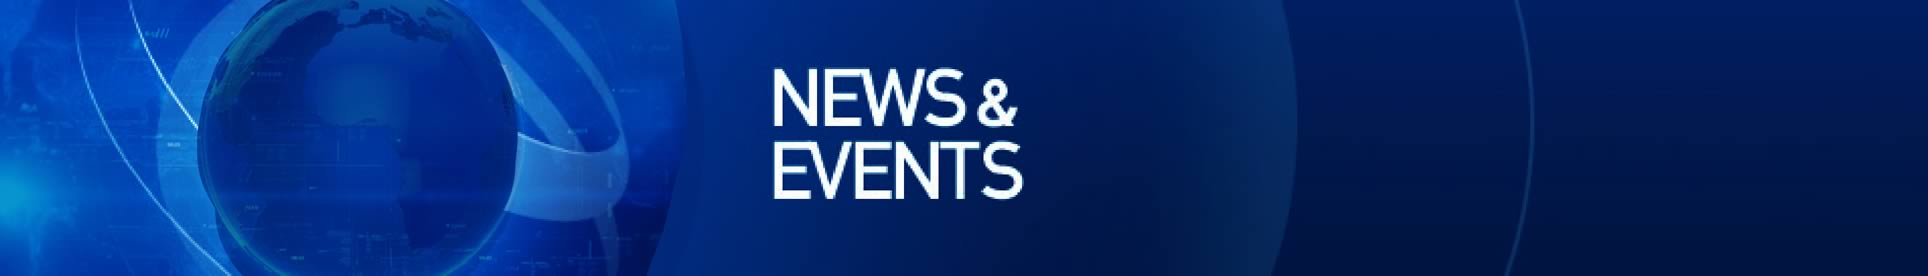 News and Events Banner